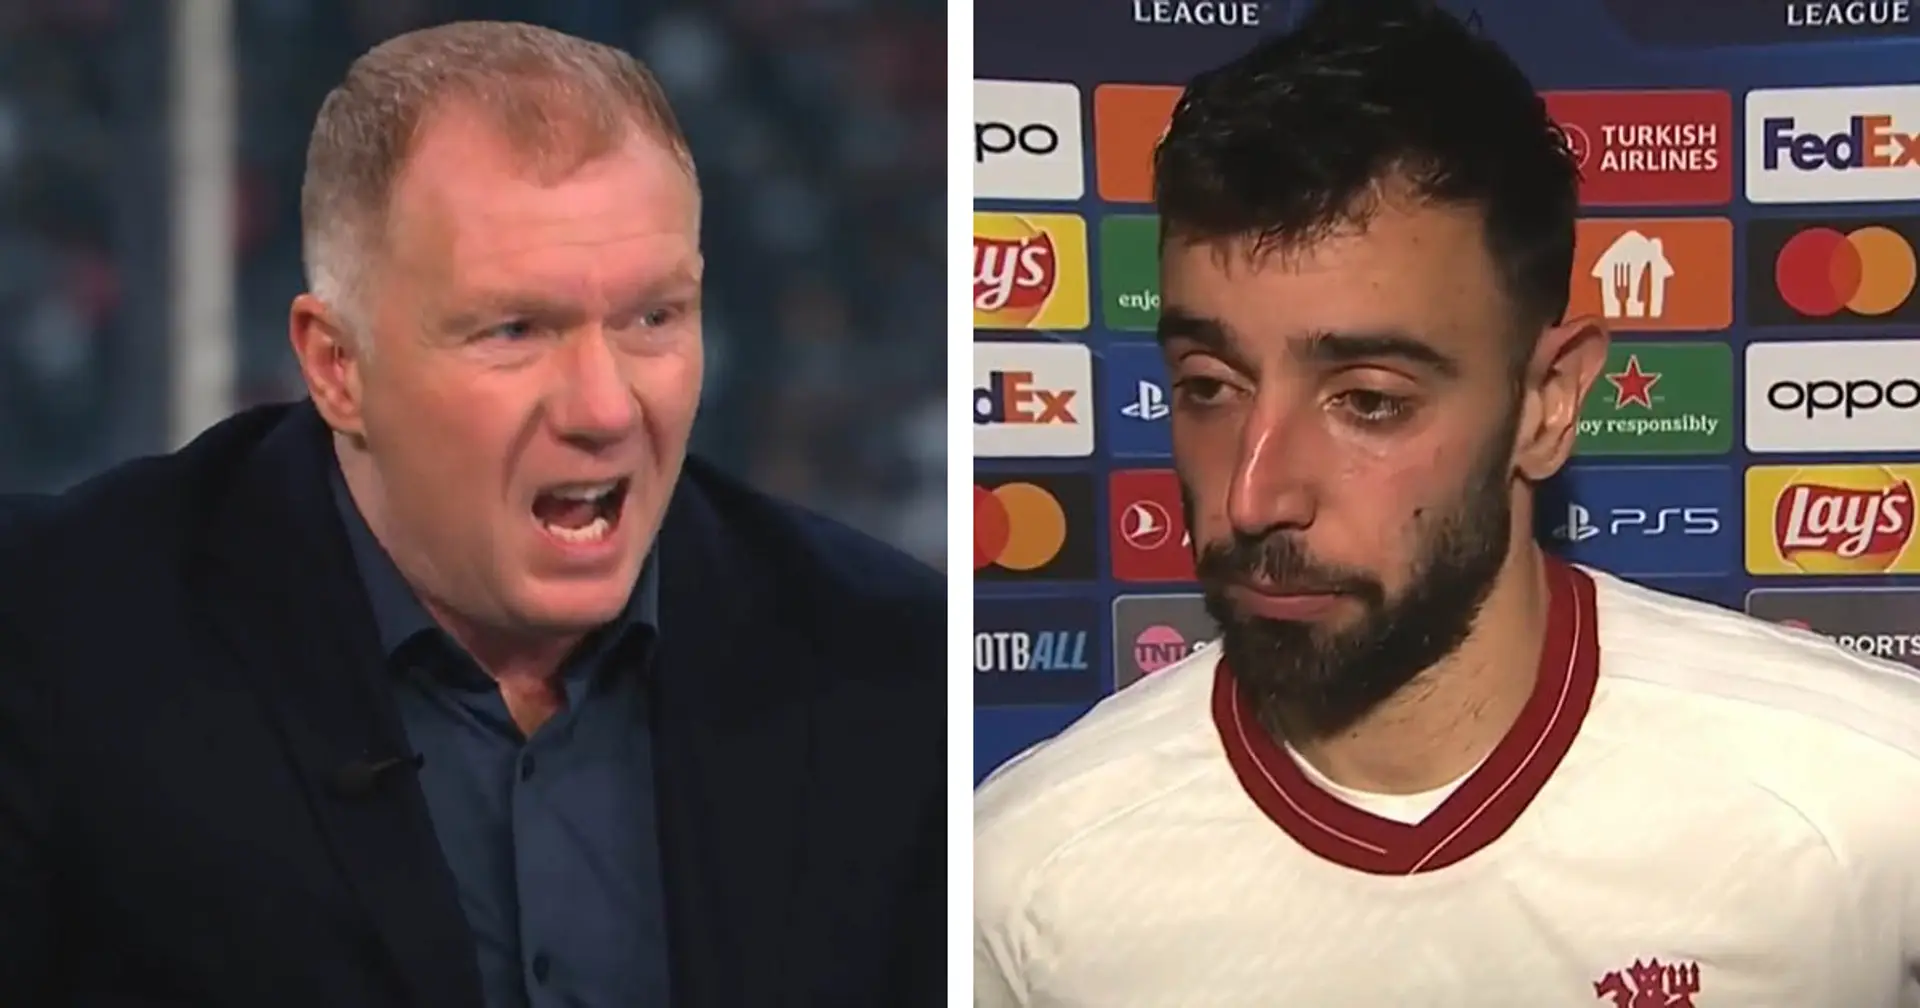 'I know he's talking about mistakes but..': Scholes takes aim at Fernandes after Galatasaray clash